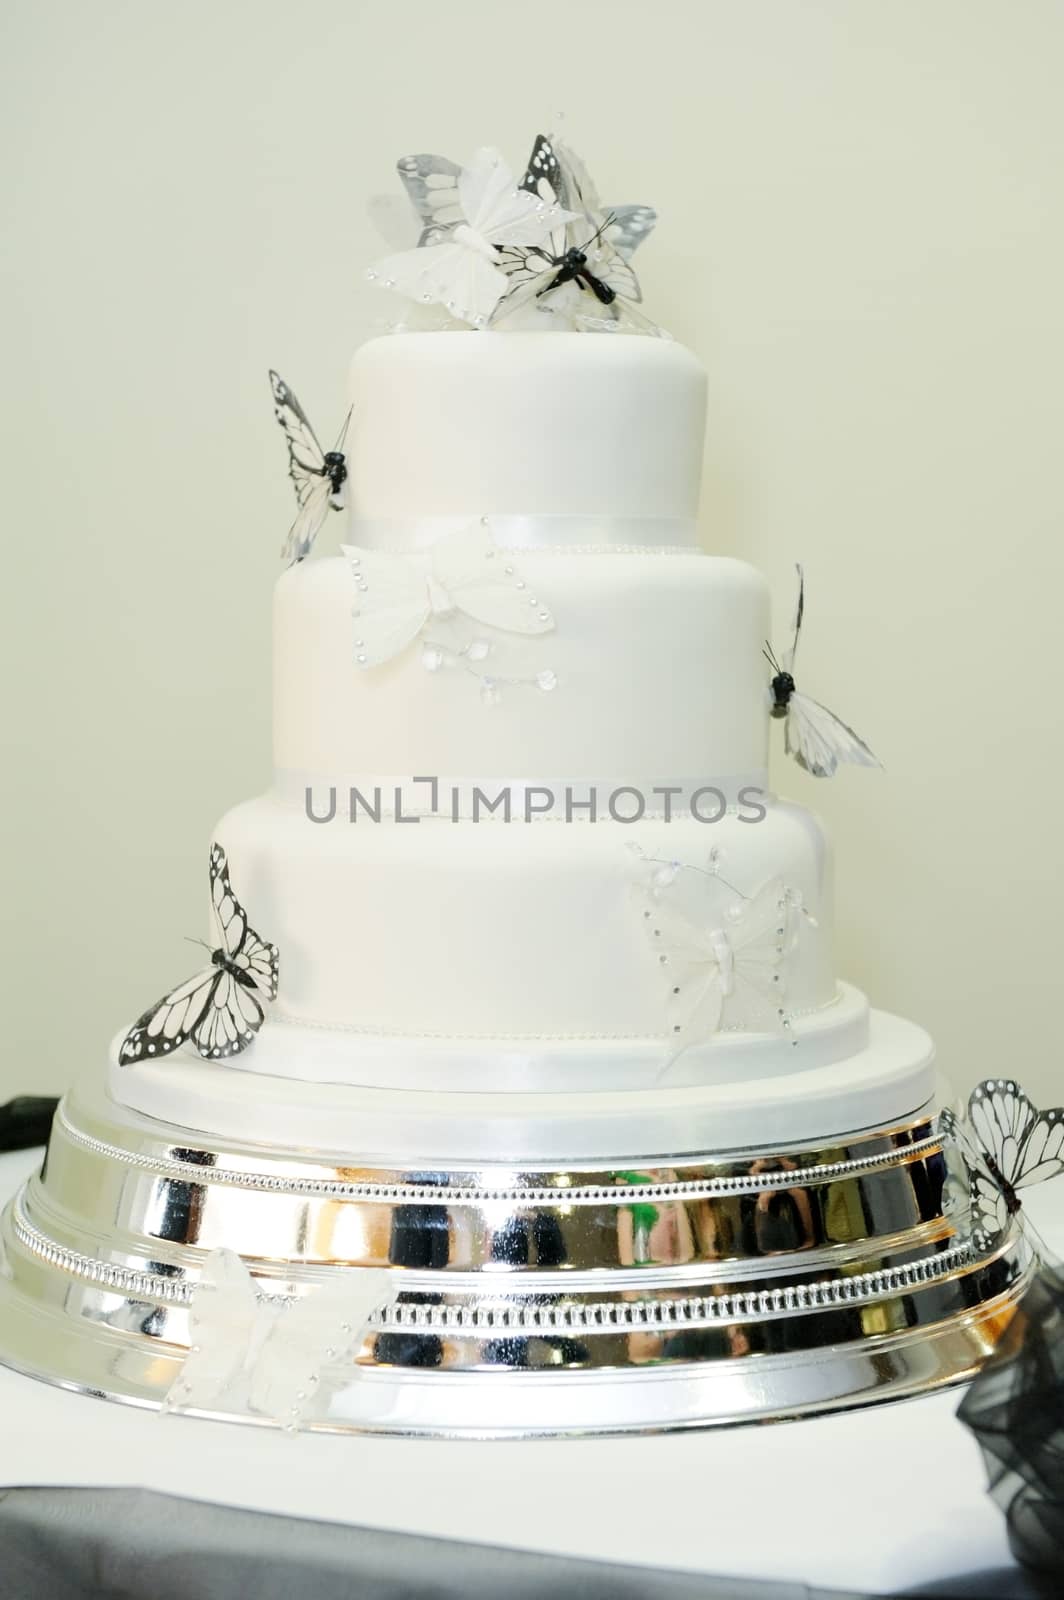 Black and white wedding cake by kmwphotography